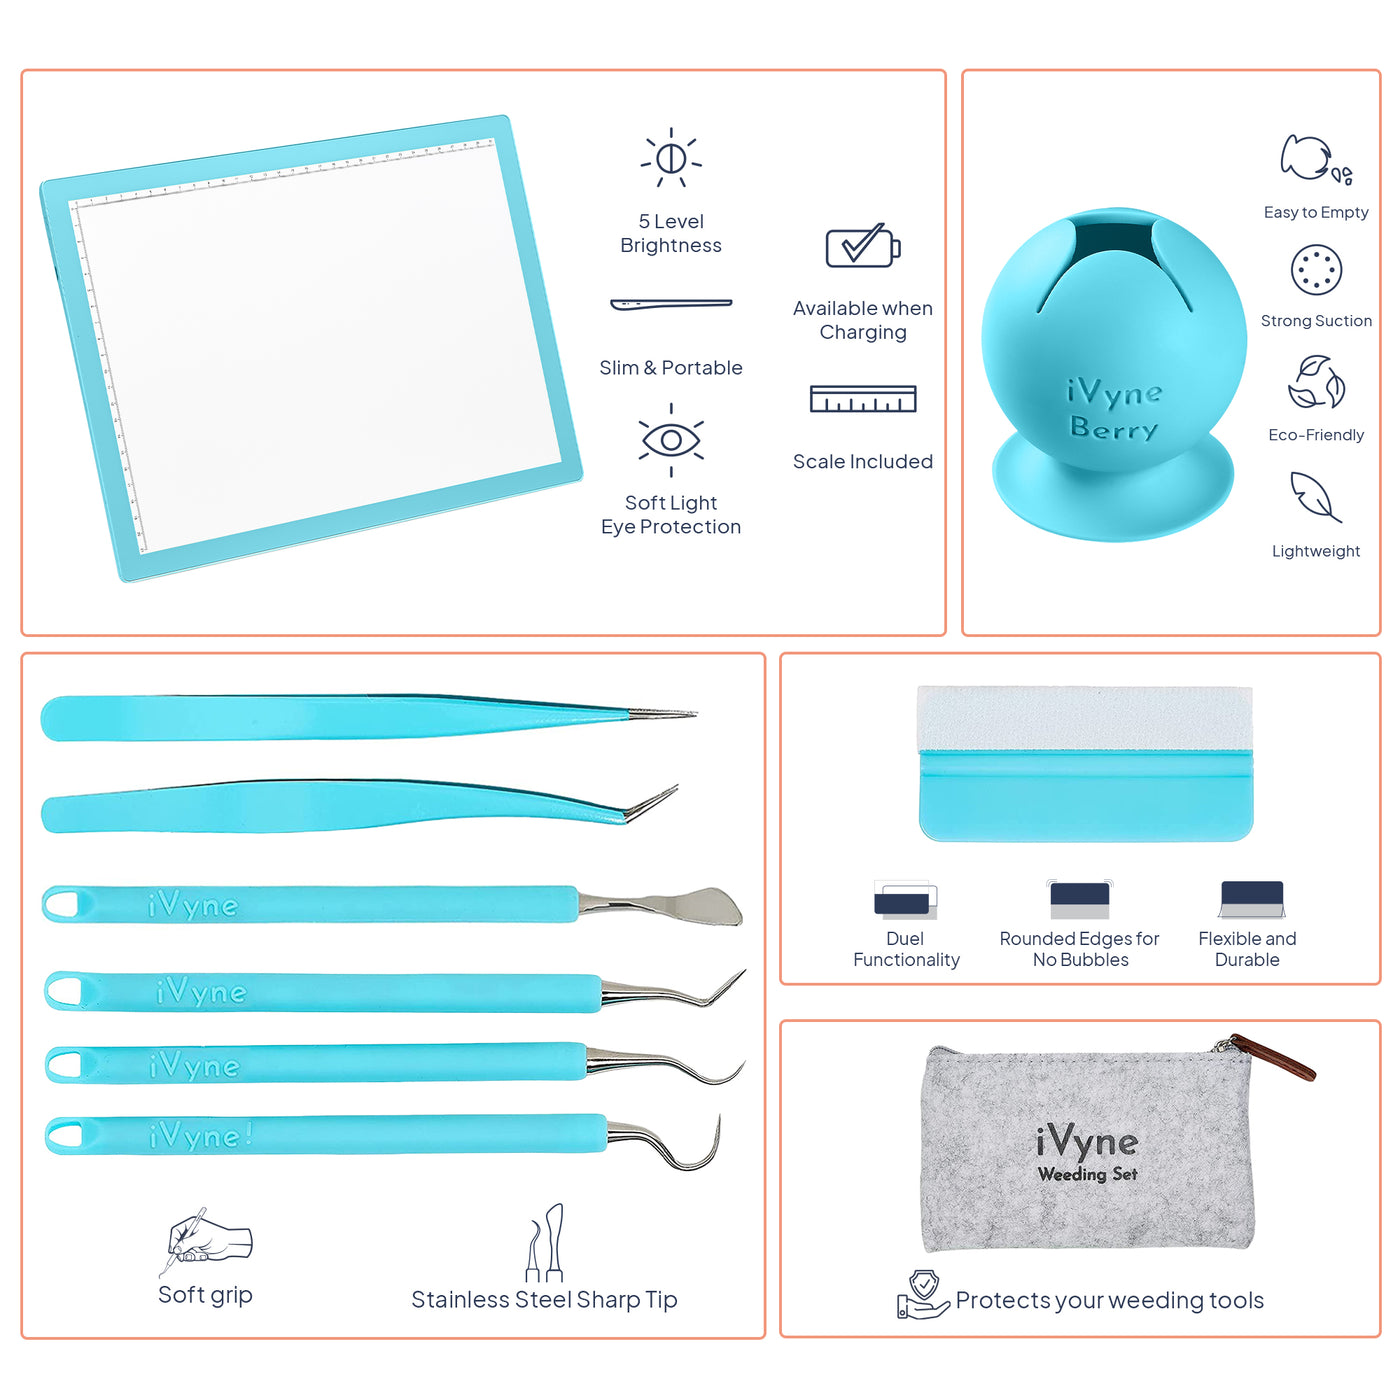 iVyne 2pcs Silicone Weeding Tools for Vinyl Cricut with Crafting Tweezer  and Weeder Tool for Vinyl, Basic Vinyl Weeding Tool Kit for Silhouette  Cameo